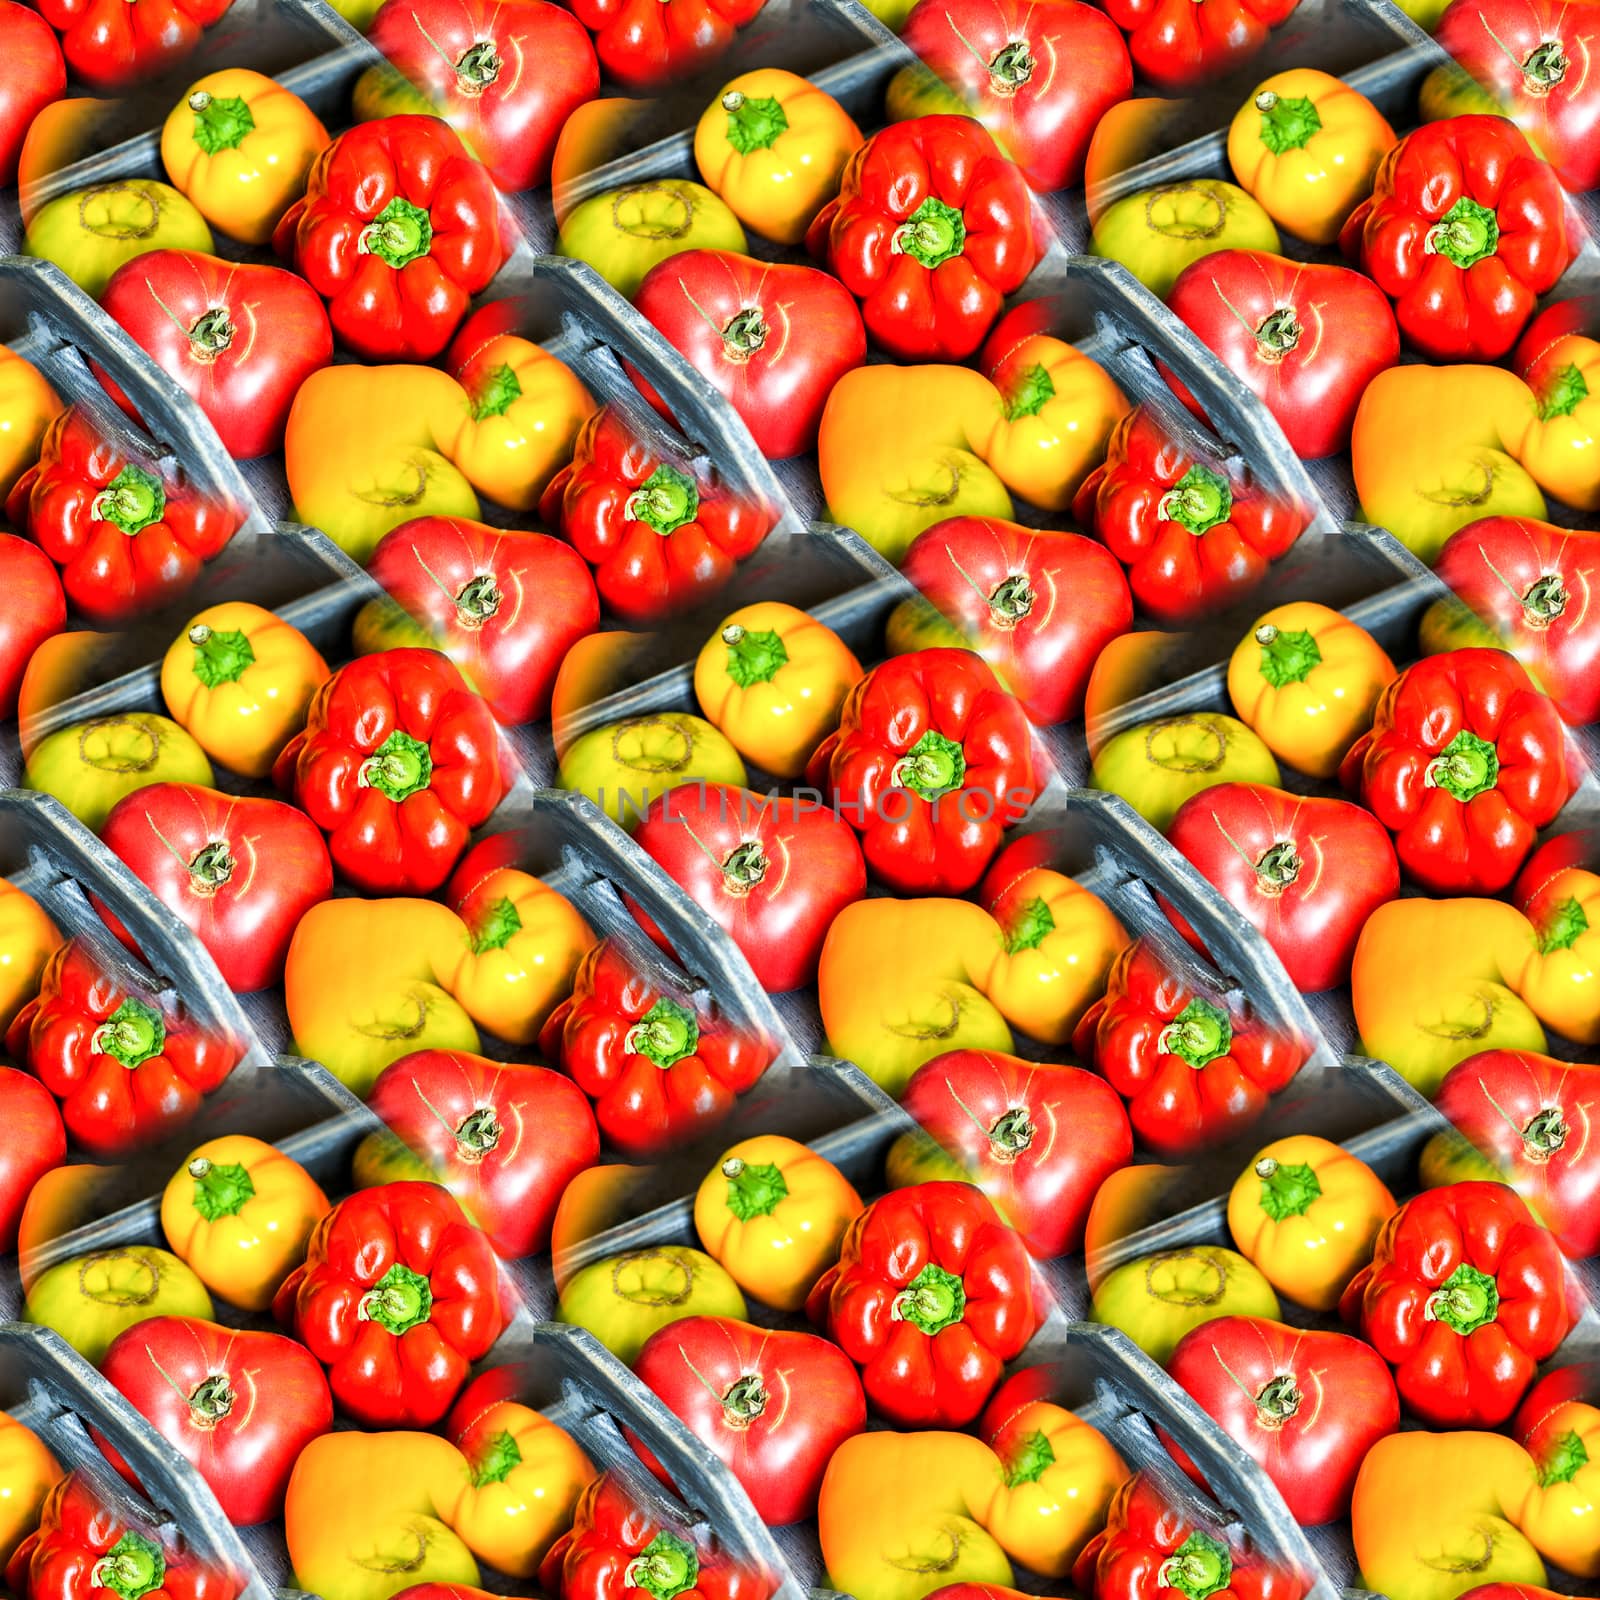 Abstract seamless background with bright red and yellow peppers on a gray wooden tray